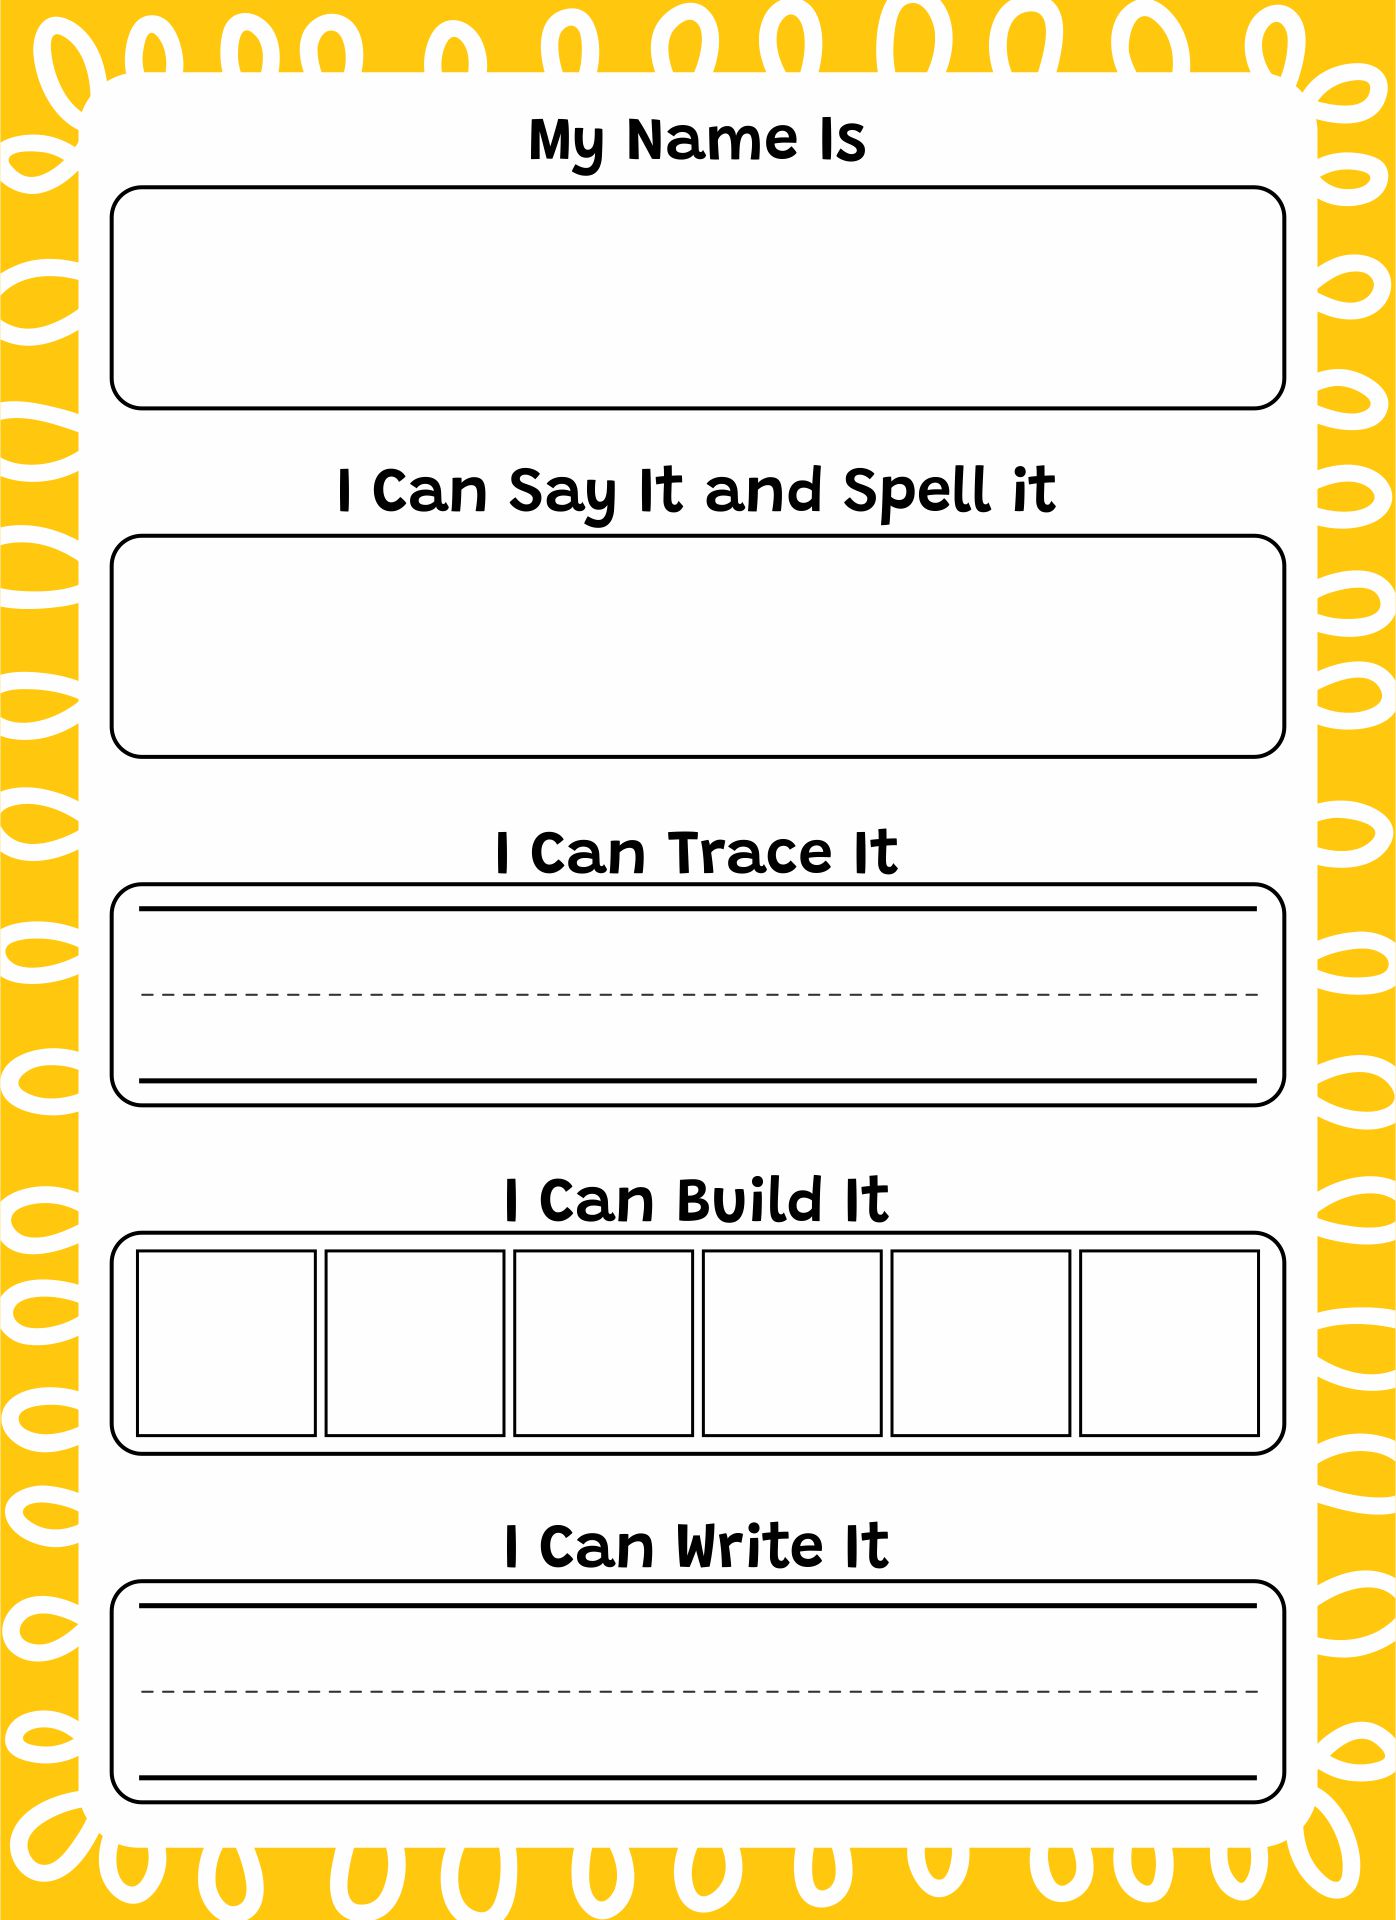 4 Best Images of Make A Name Tracing Sheet Printable  Write Your Name Worksheets, Free 